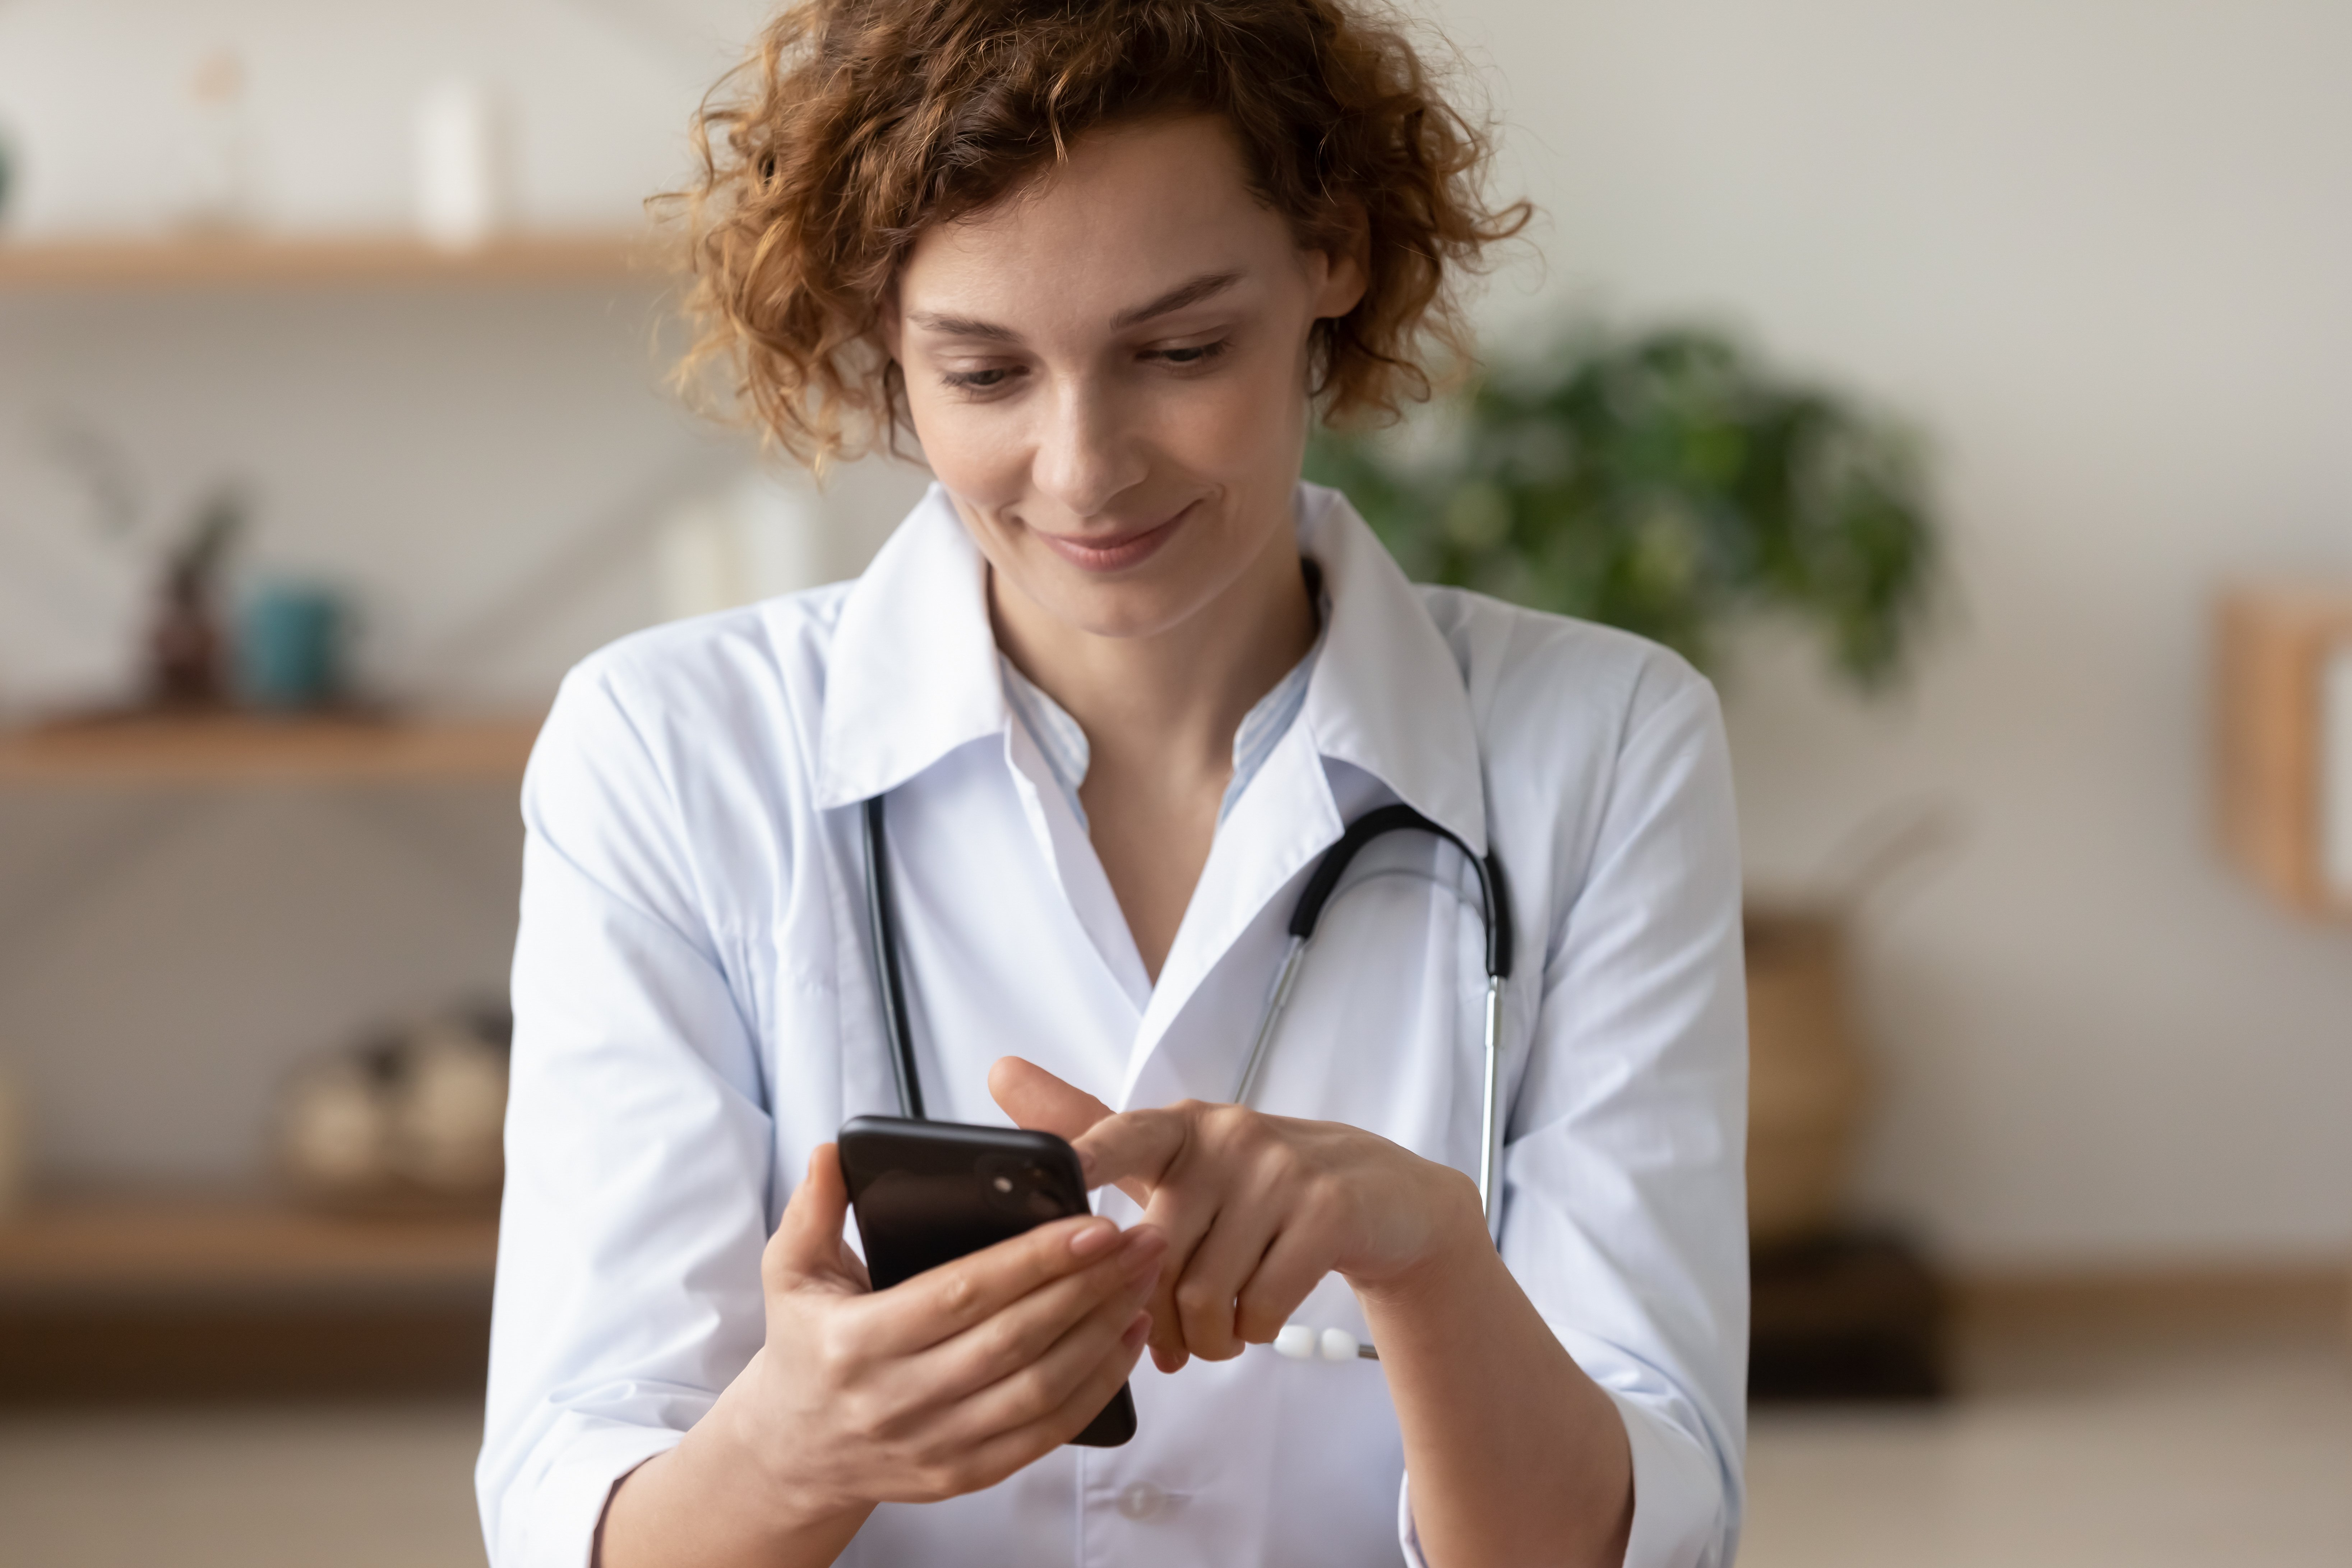 texting in healthcare